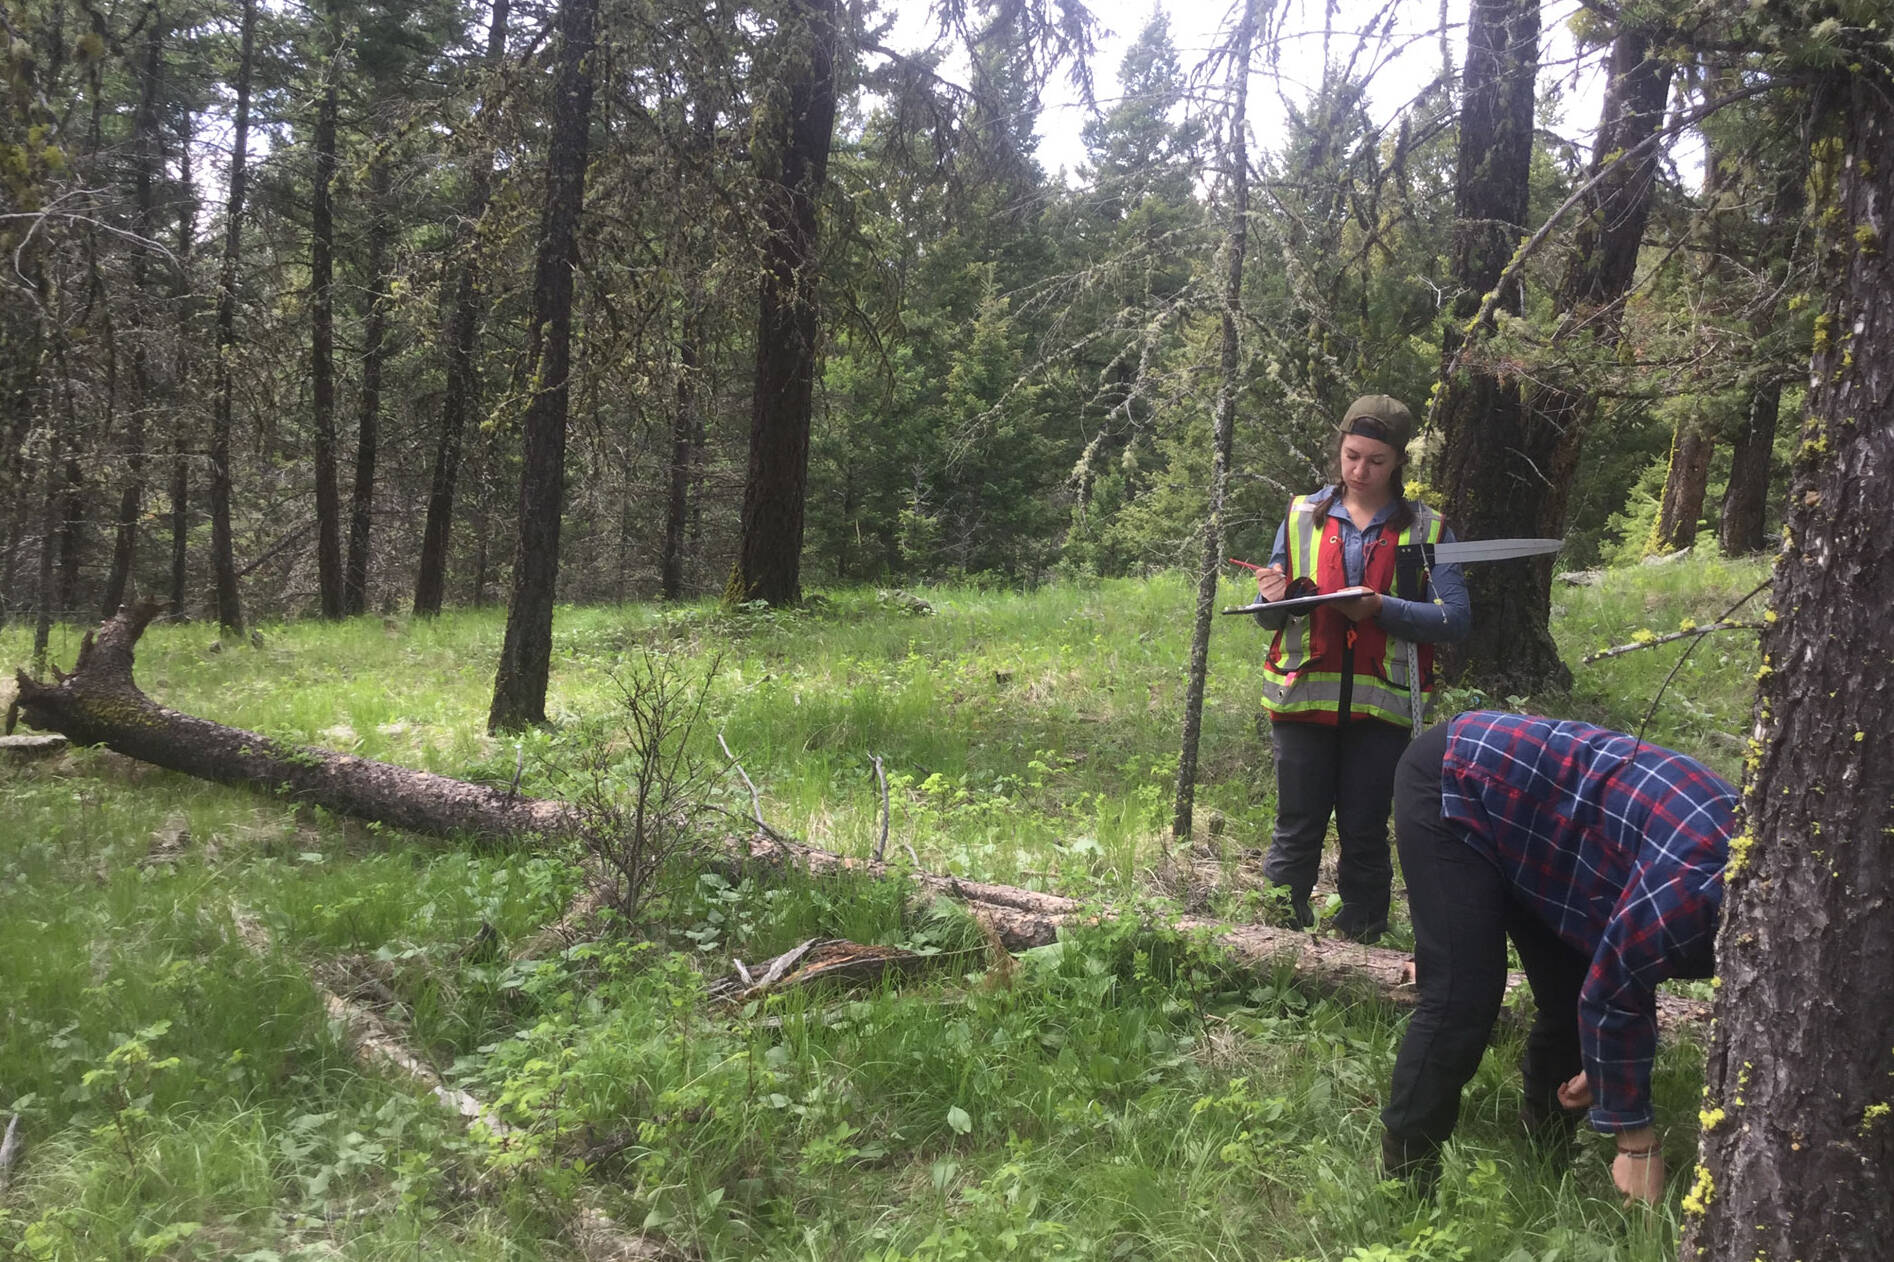 The mother tree experiment involves monitoring regrowth after selective harvesting in B.C. forests. (Submitted photo)